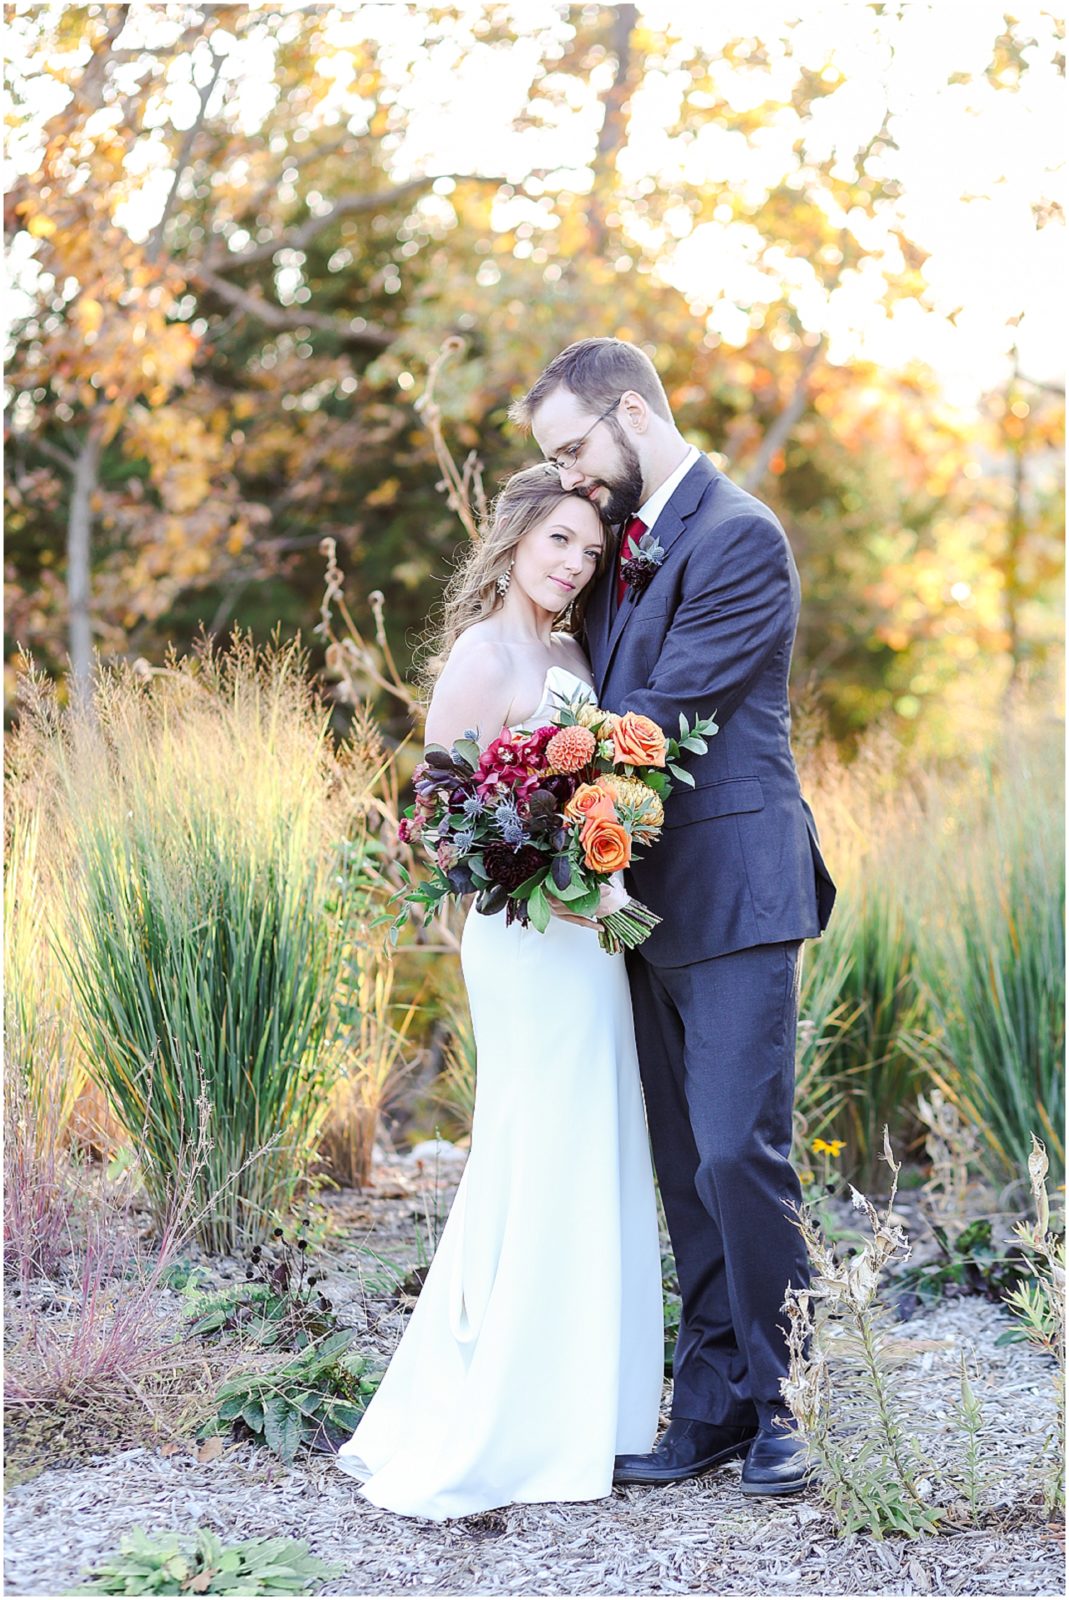 Lux Fall Floral Wedding Photography at Eagles Landing at Lake Olathe | Wedding Photographer Mariam Saifan Photography | Fall Wedding Theme | Different Color Bridesmaids Dresses | Flat Lays | Pretty Details | Photography Education | Wild Hill Flowers | Good Earth Floral | Kansas City Wedding Planners